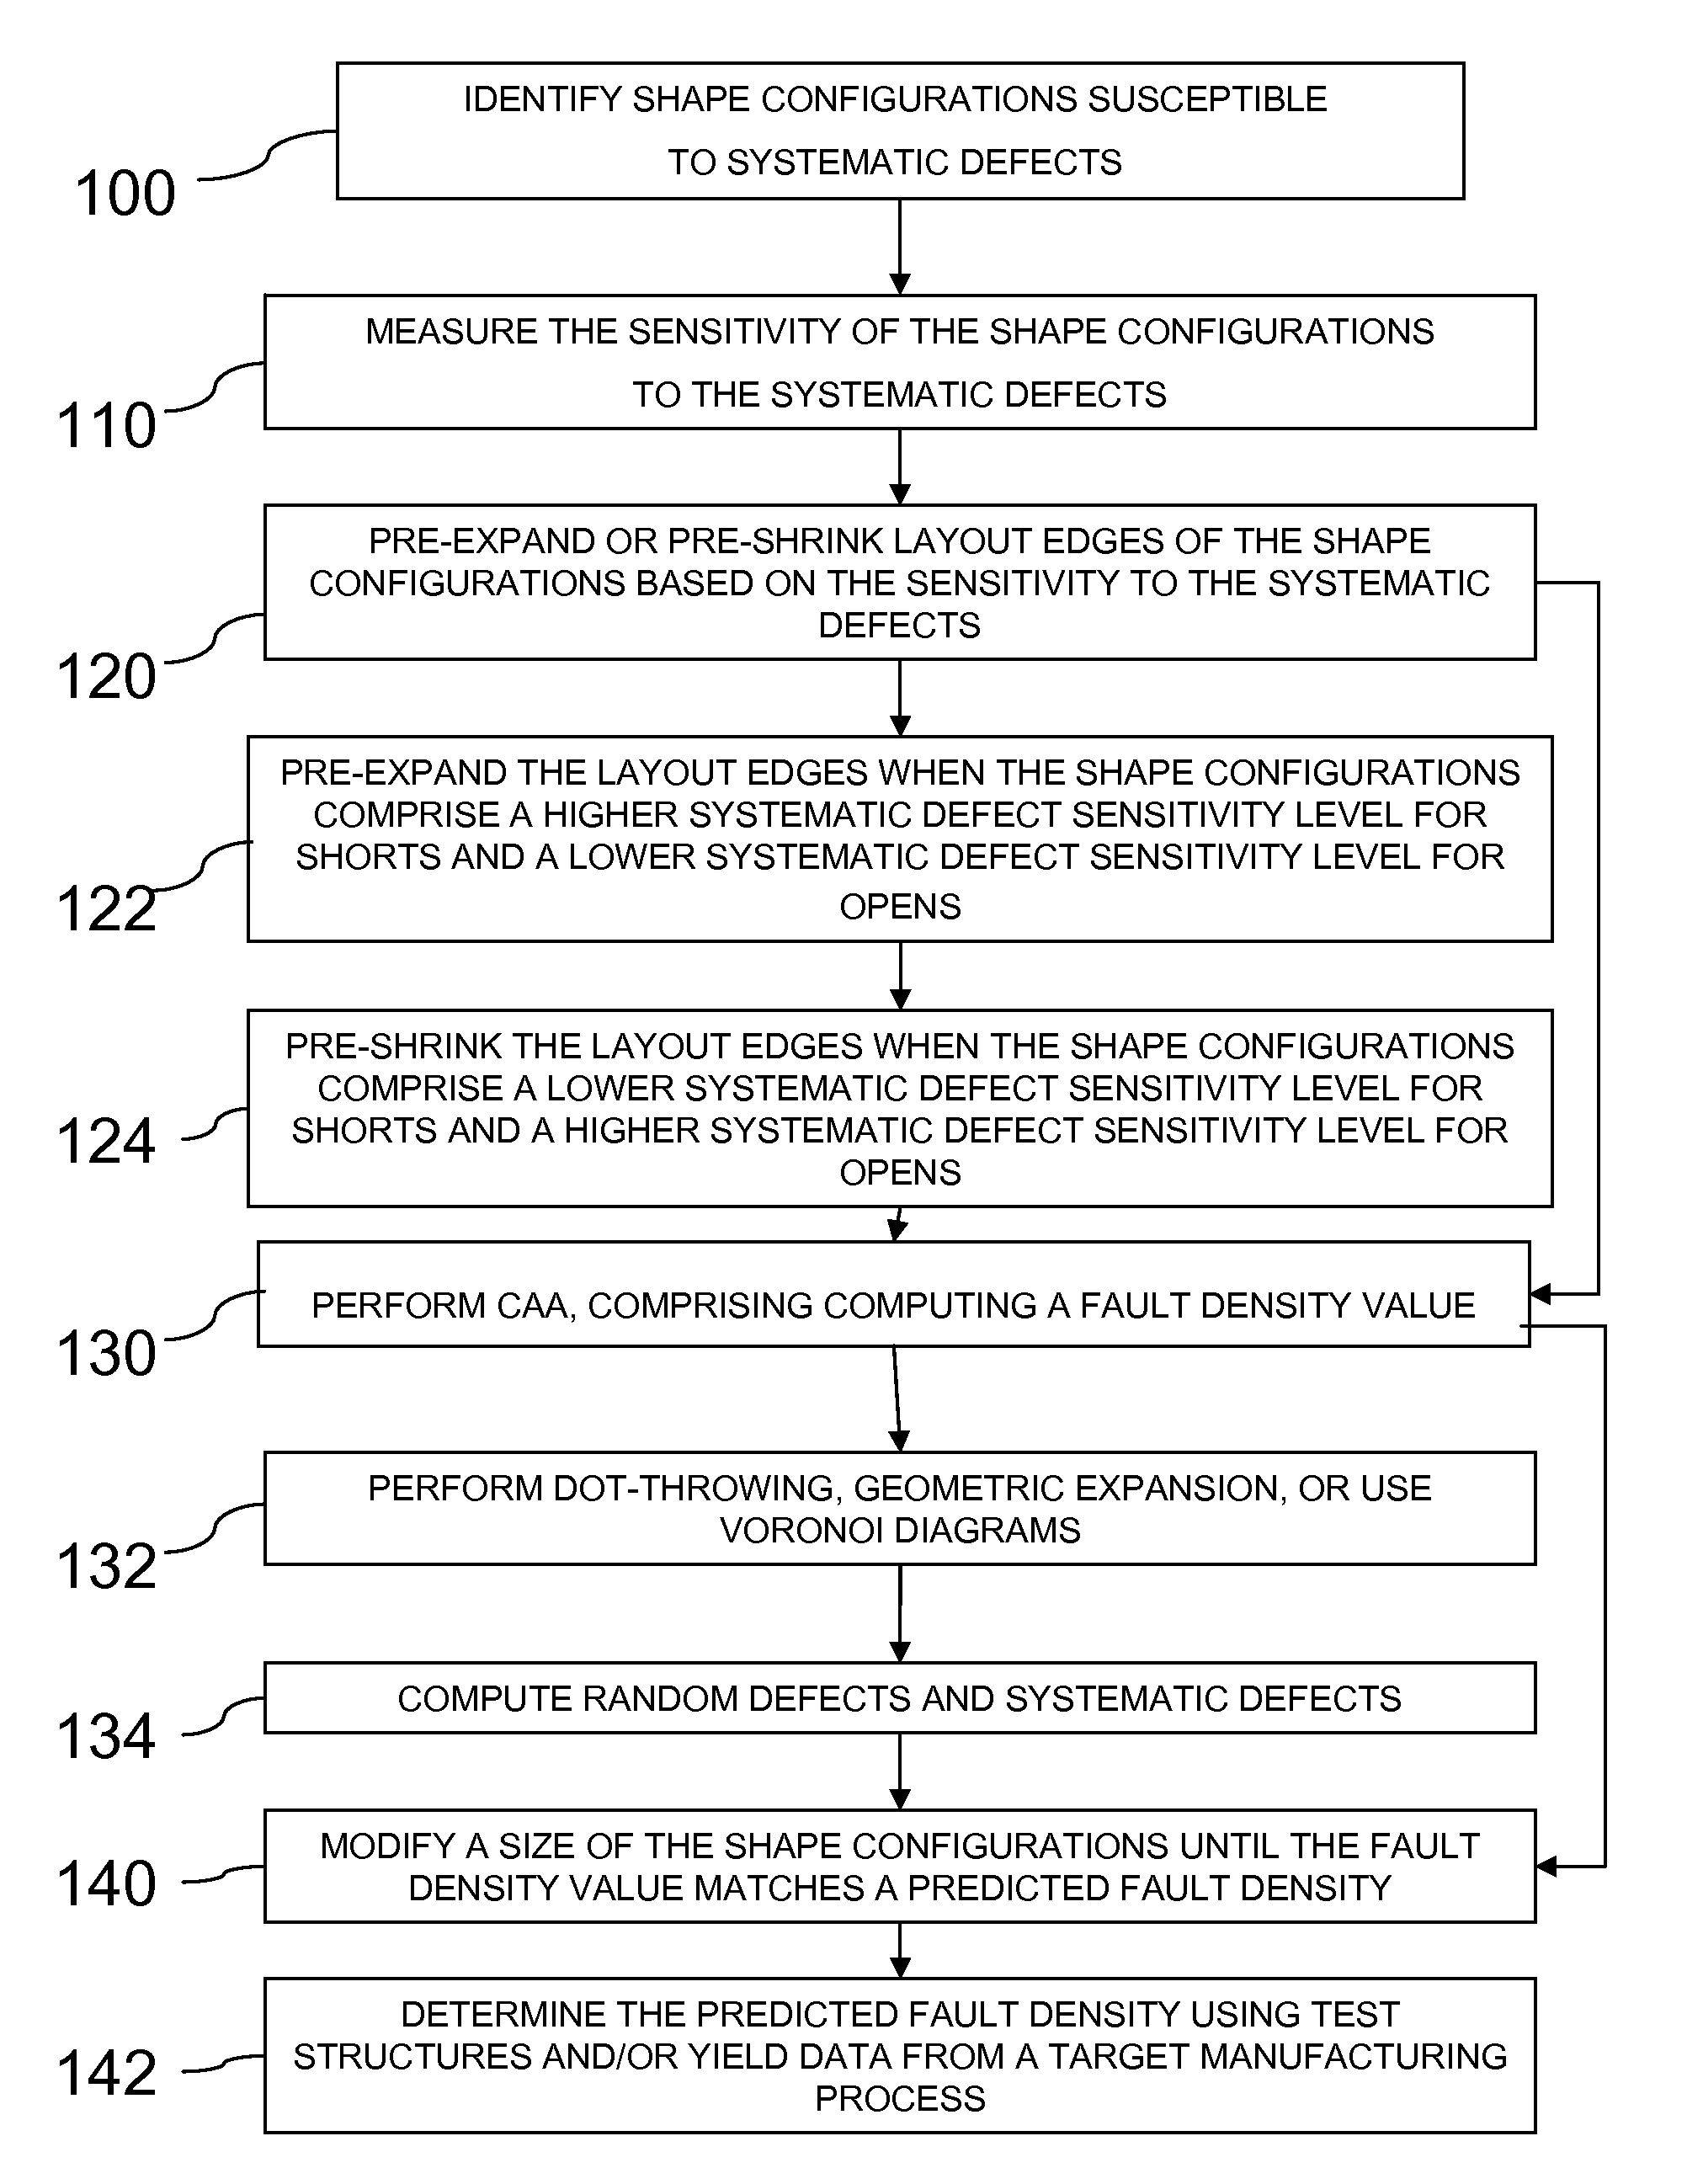 Method for computing the sensitivity of a VLSI design to both random and systematic defects using a critical area analysis tool